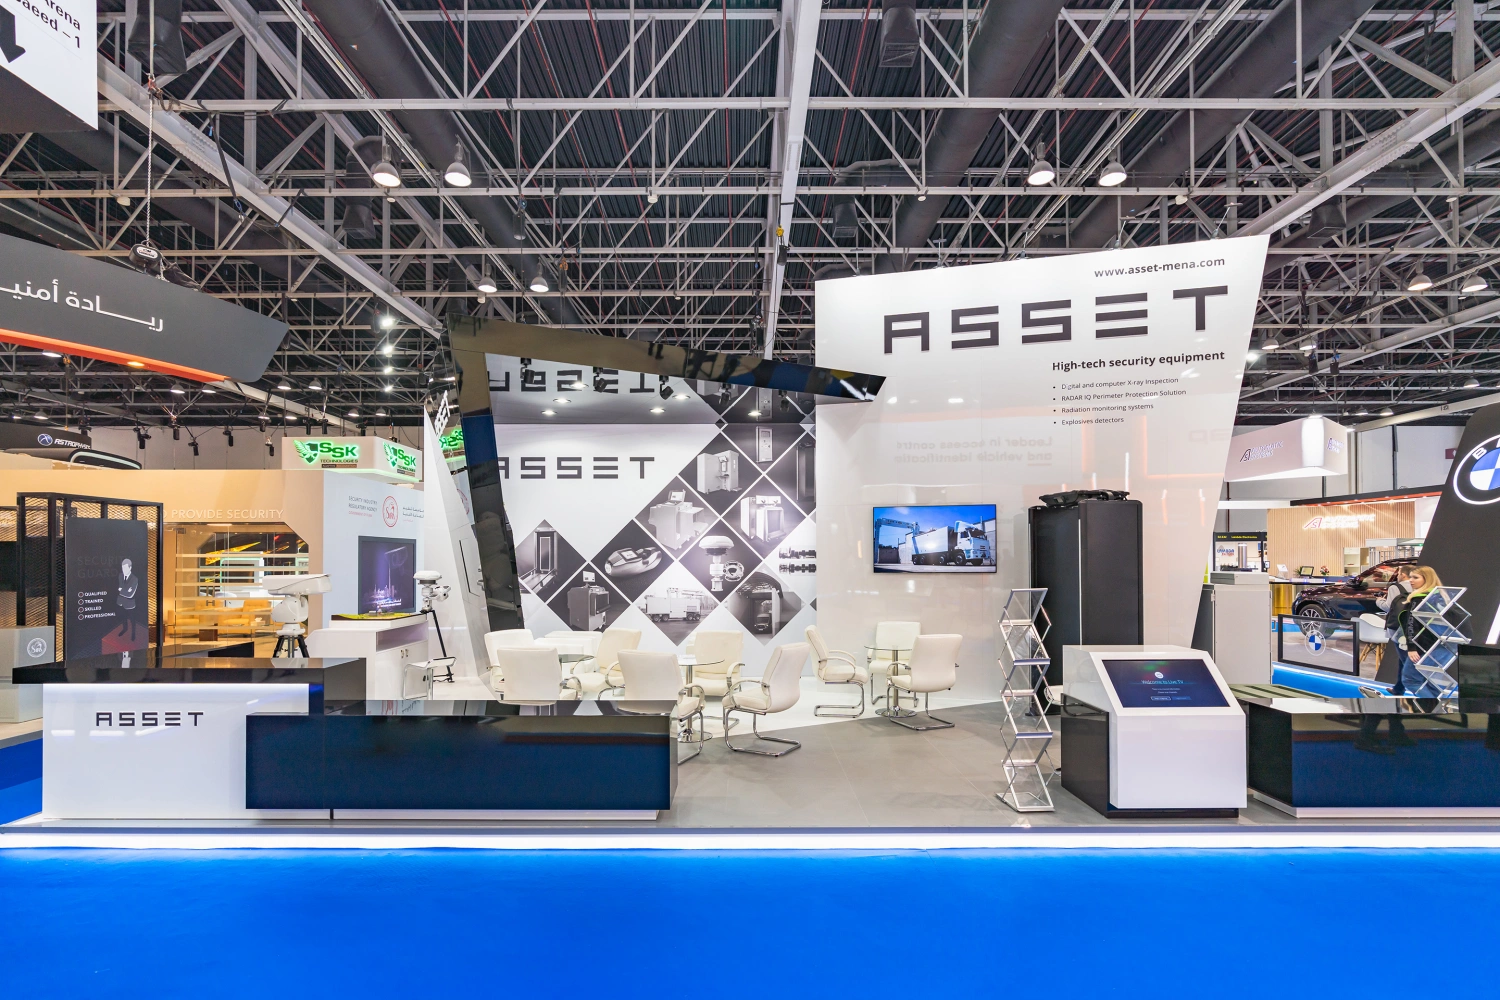 ASSET stand on INTERSEC exhibition